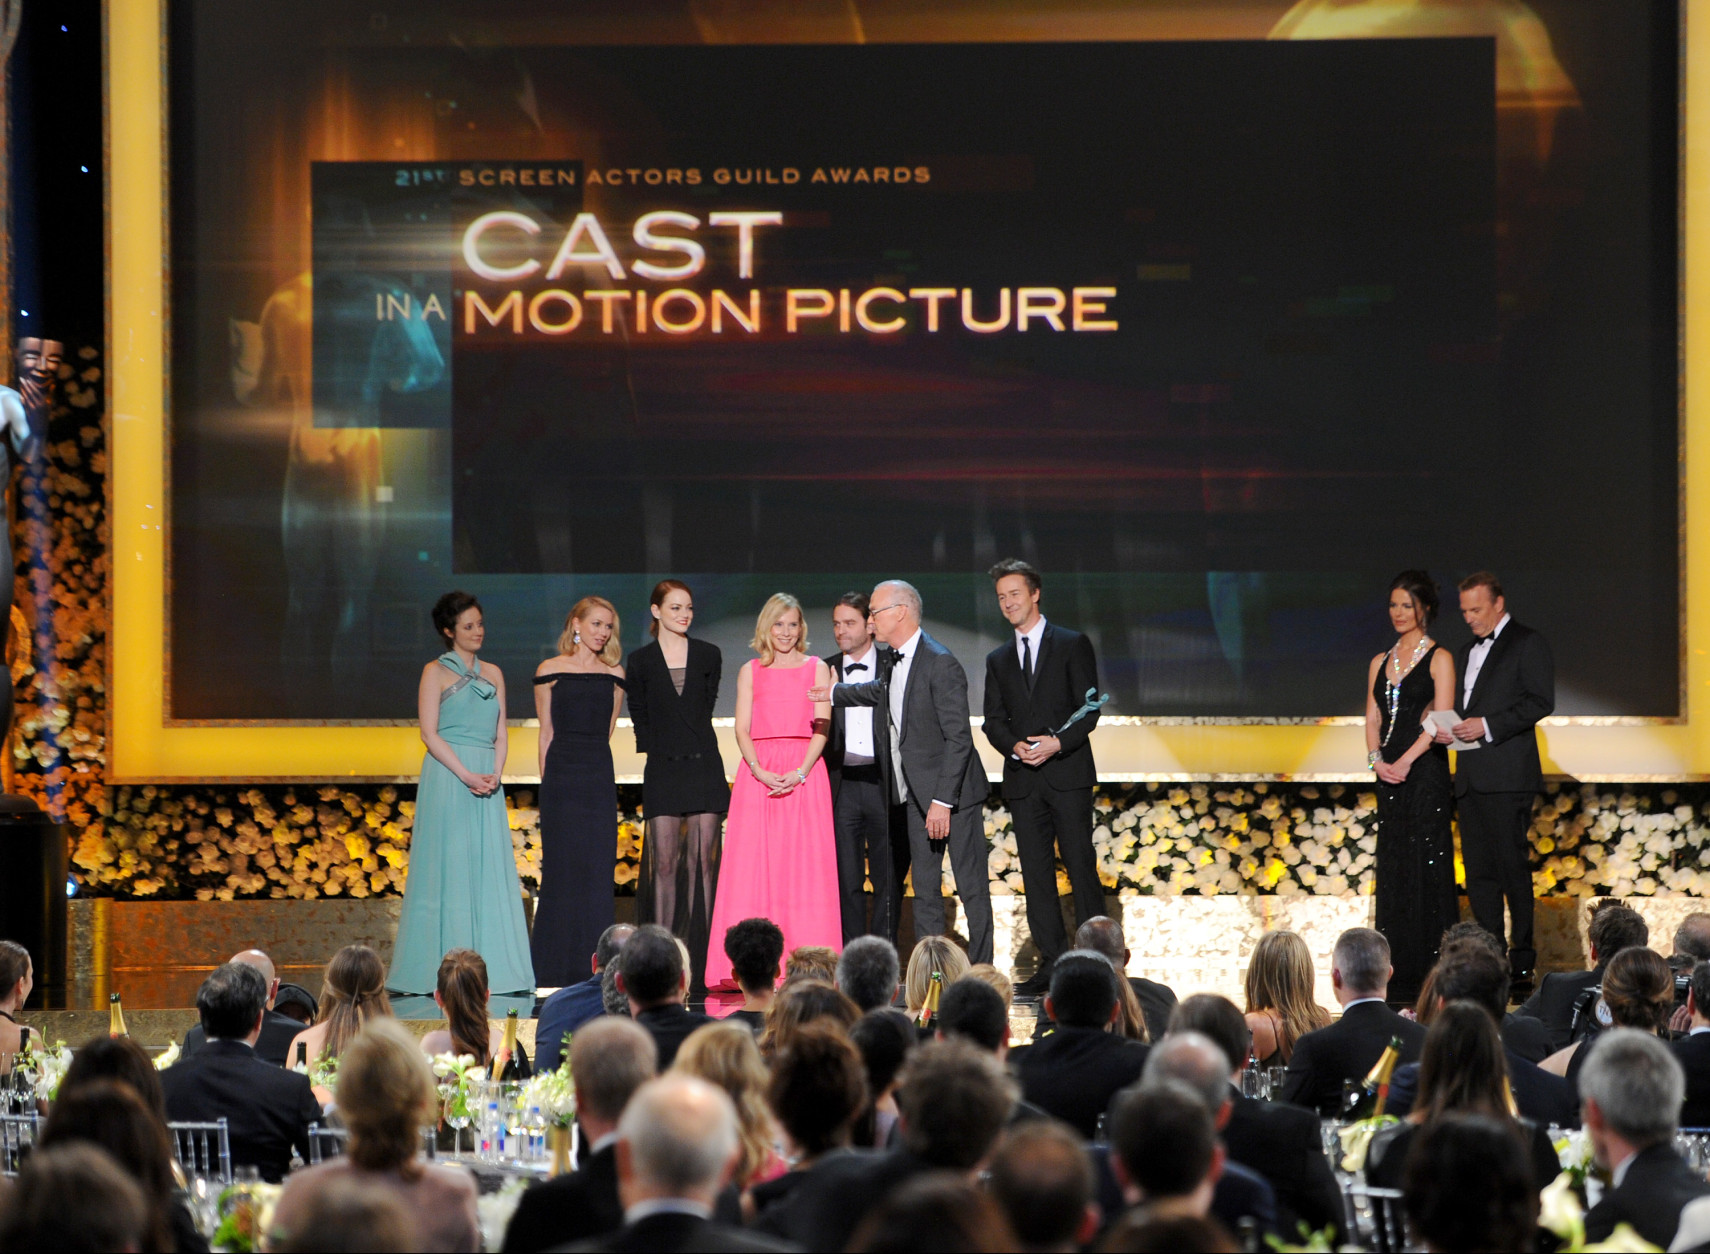 The cast of "Birdman" accepts the award for outstanding performance by a cast in a motion picture on stage during the 21st annual Screen Actors Guild Awards at the Shrine Auditorium on Sunday, Jan. 25, 2015, in Los Angeles. (Photo by Vince Bucci/Invision/AP)